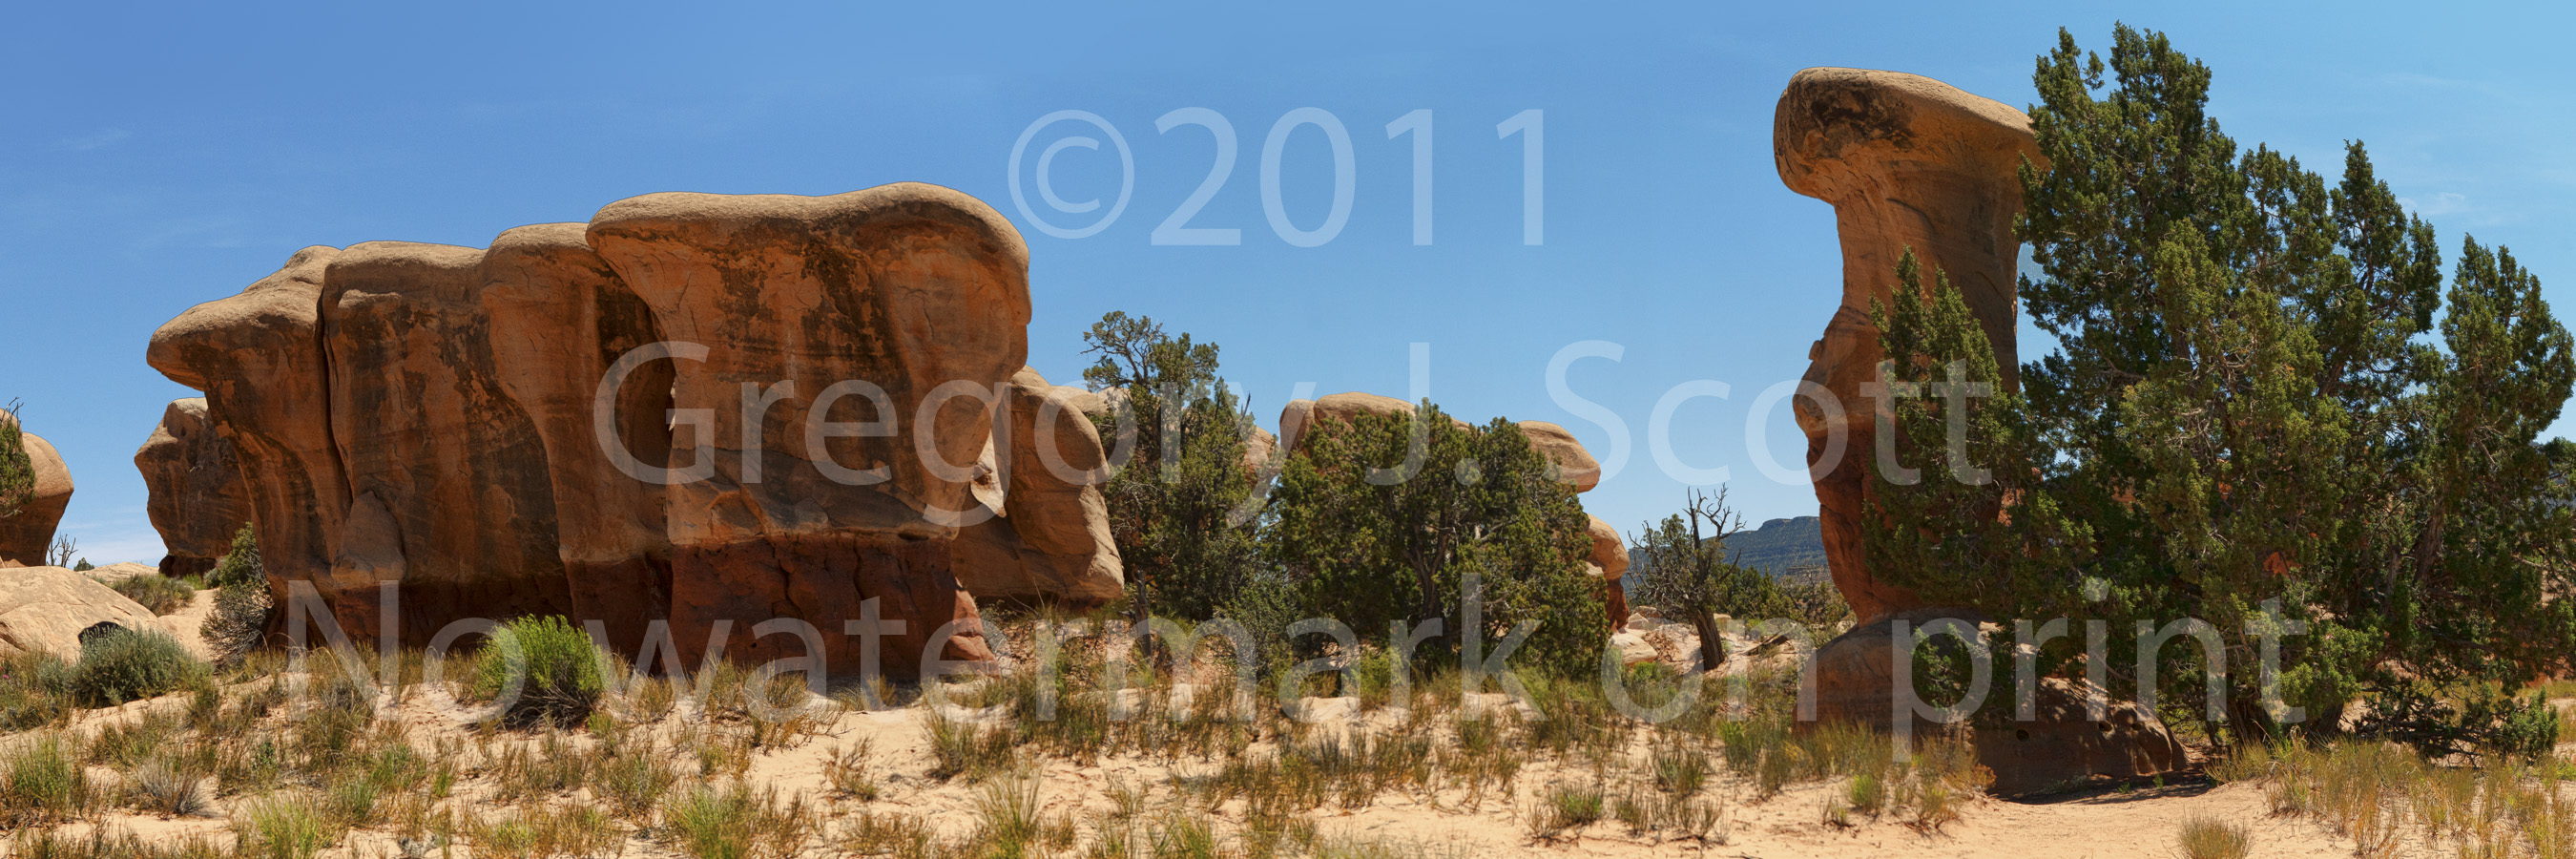 Mysterious Hoodoo Gathering, Photographed May 31, 2011